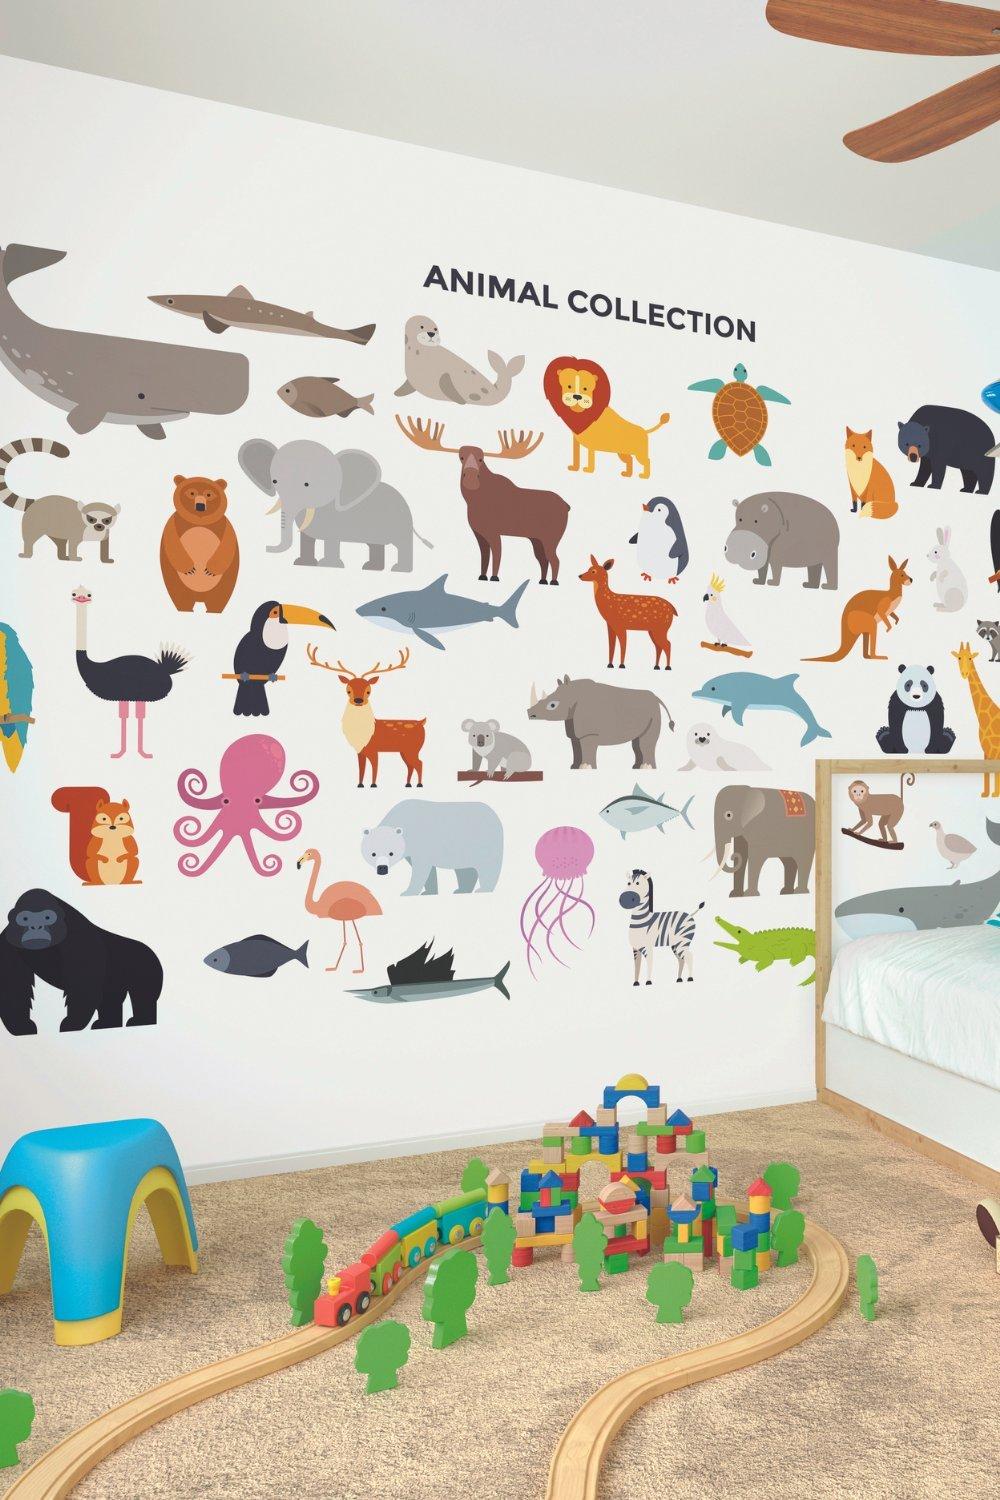 Animal Collection Multi Matt Smooth Paste the Wall Mural 350cm wide x 280cm high